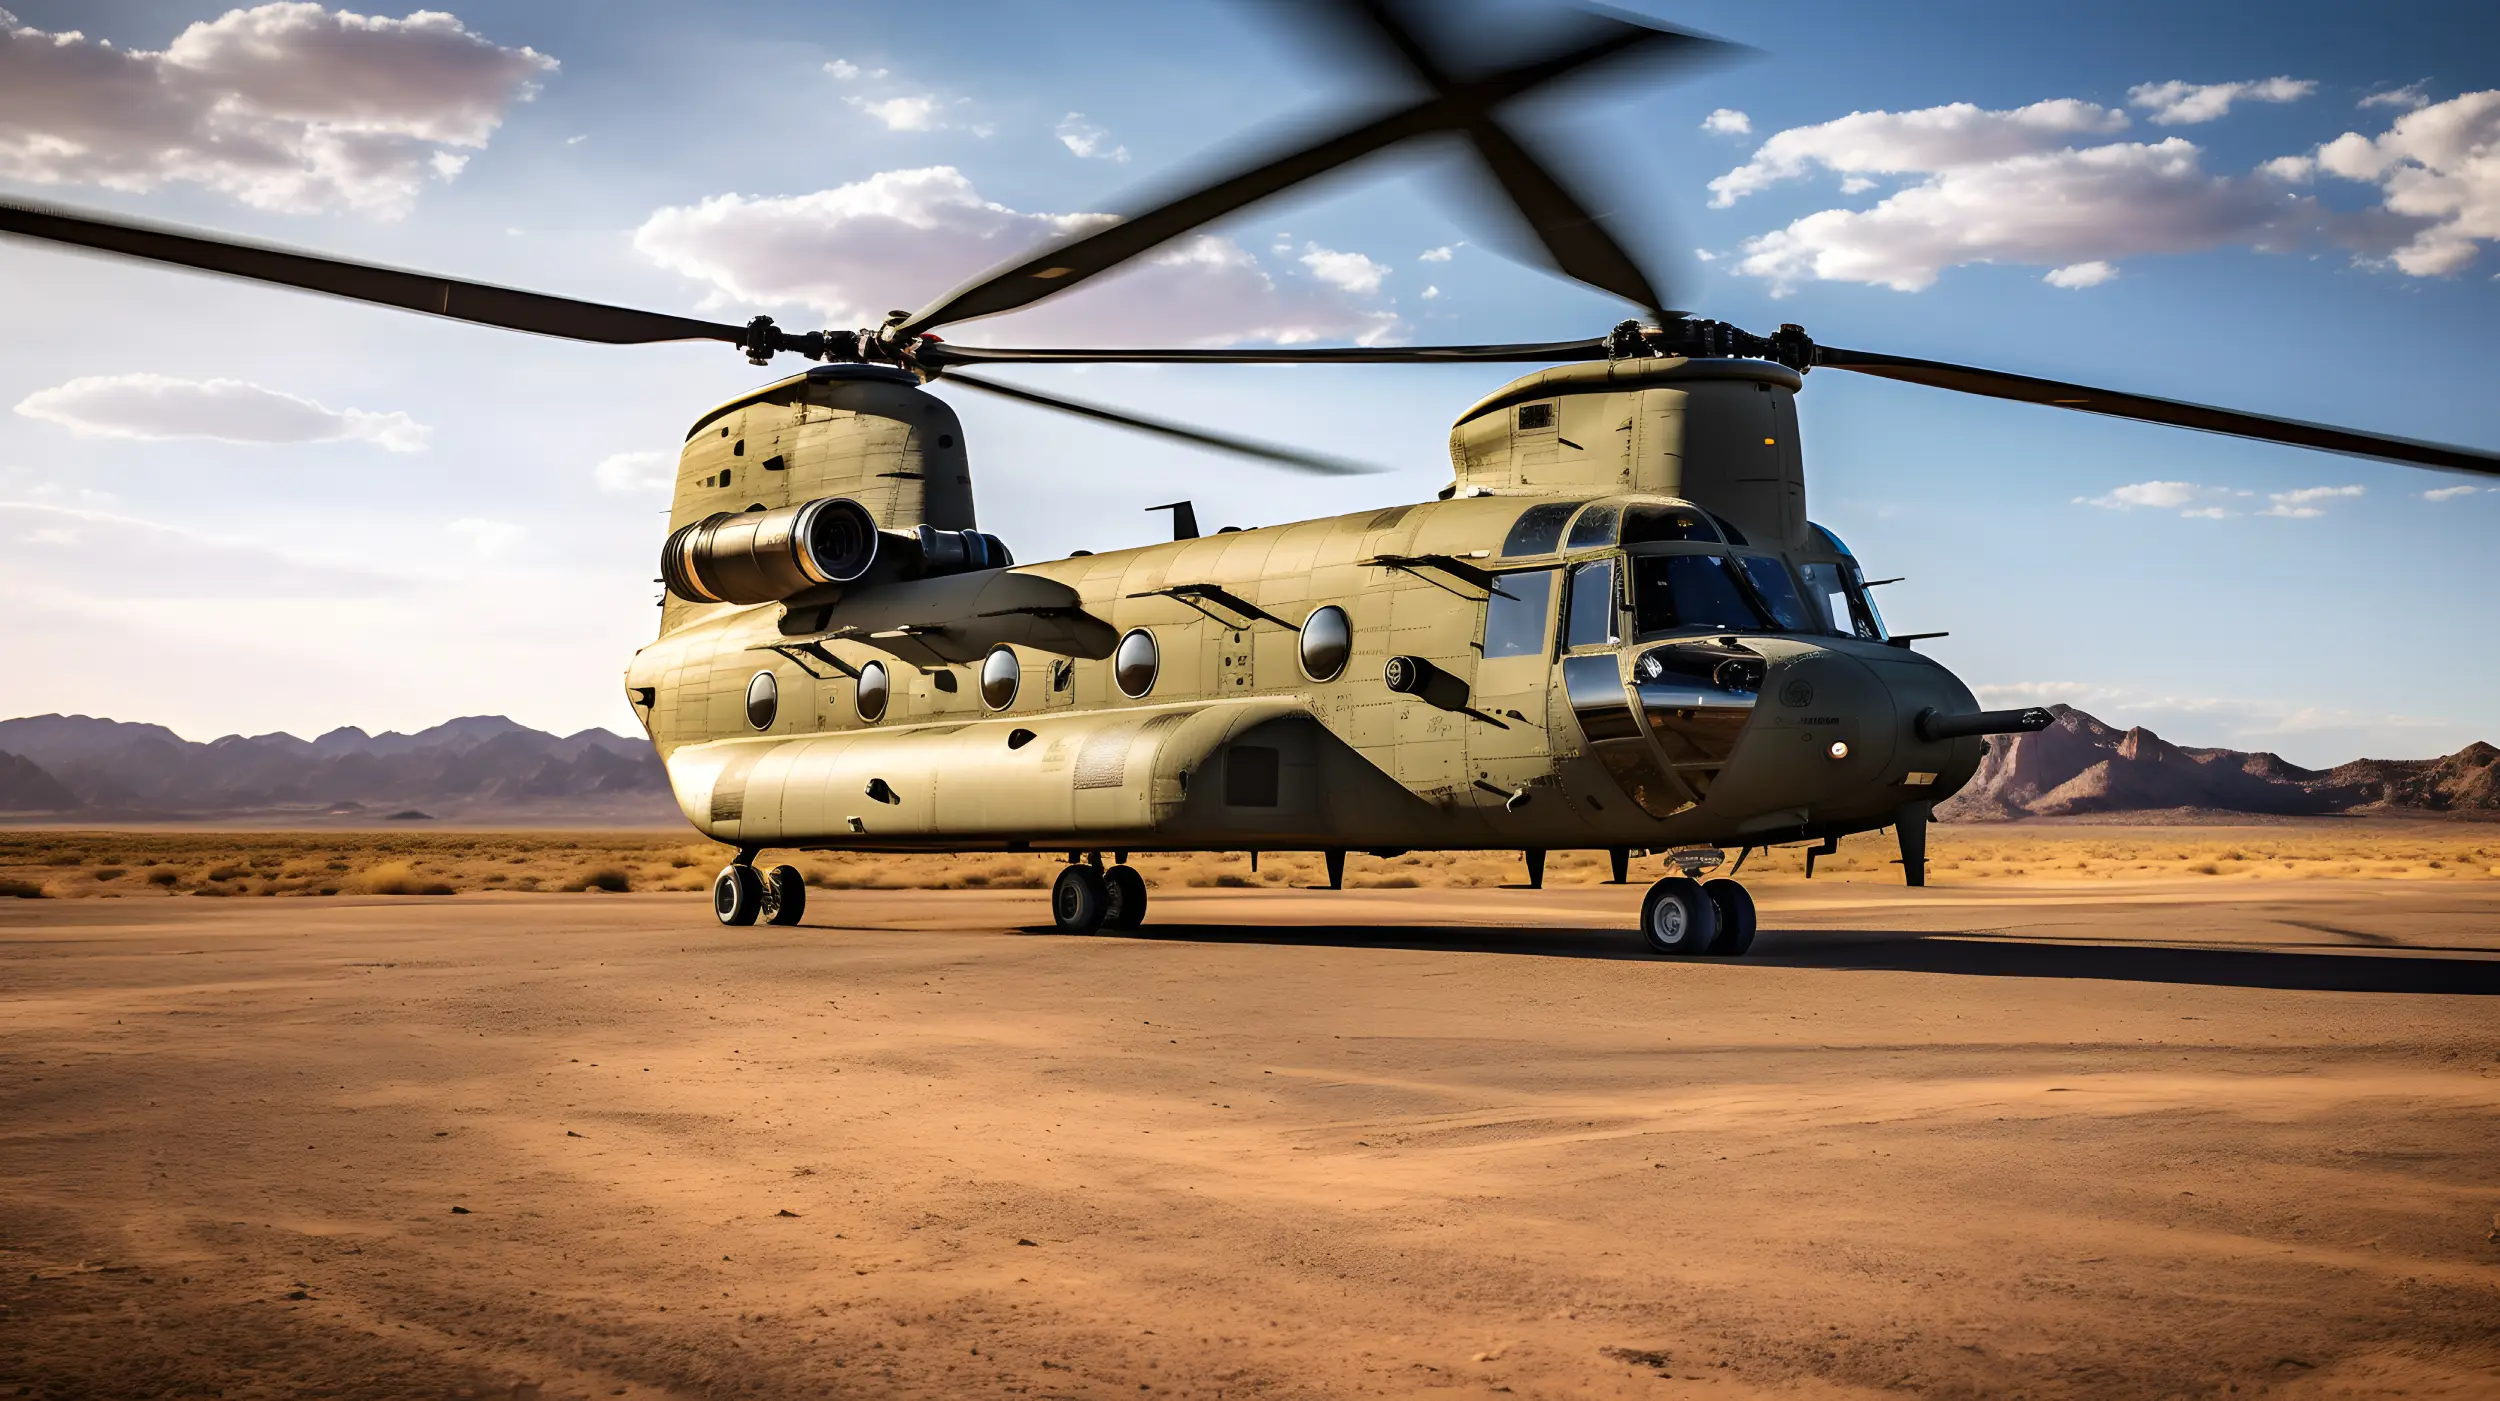 The Boeing CH-47 Chinook